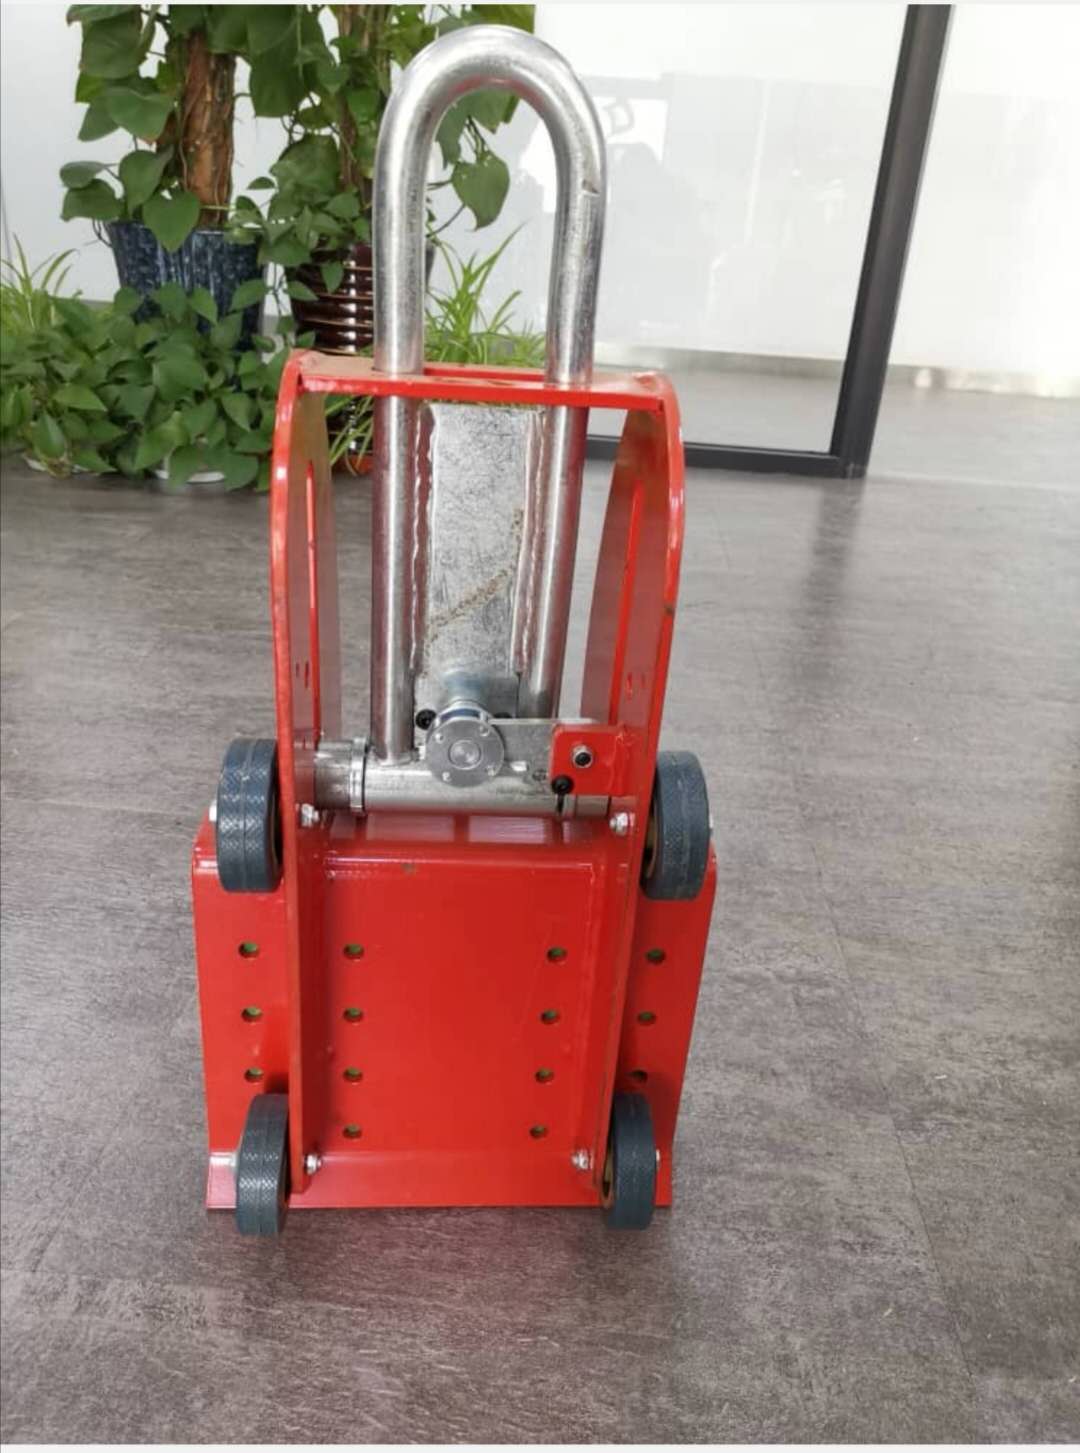 Full-Automatic Glass Lifting Clamp